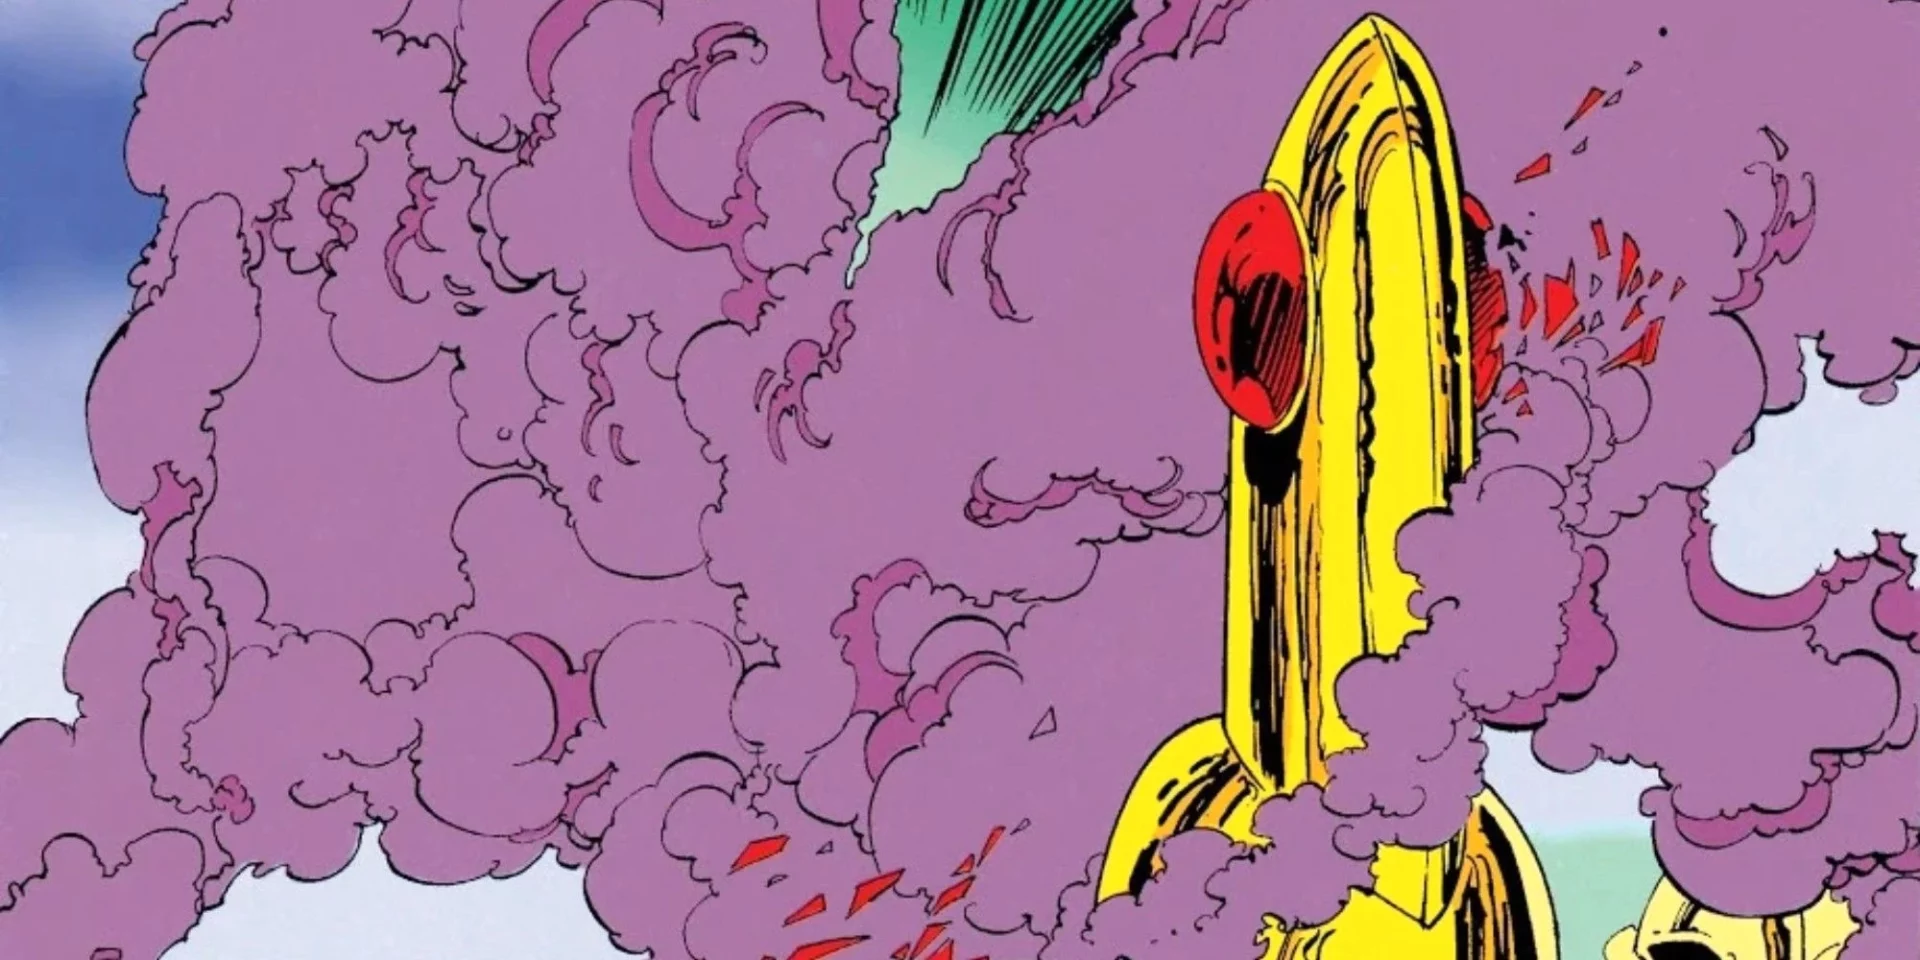 marvel 10 worst things kang the conqueror has done in the comics article image4